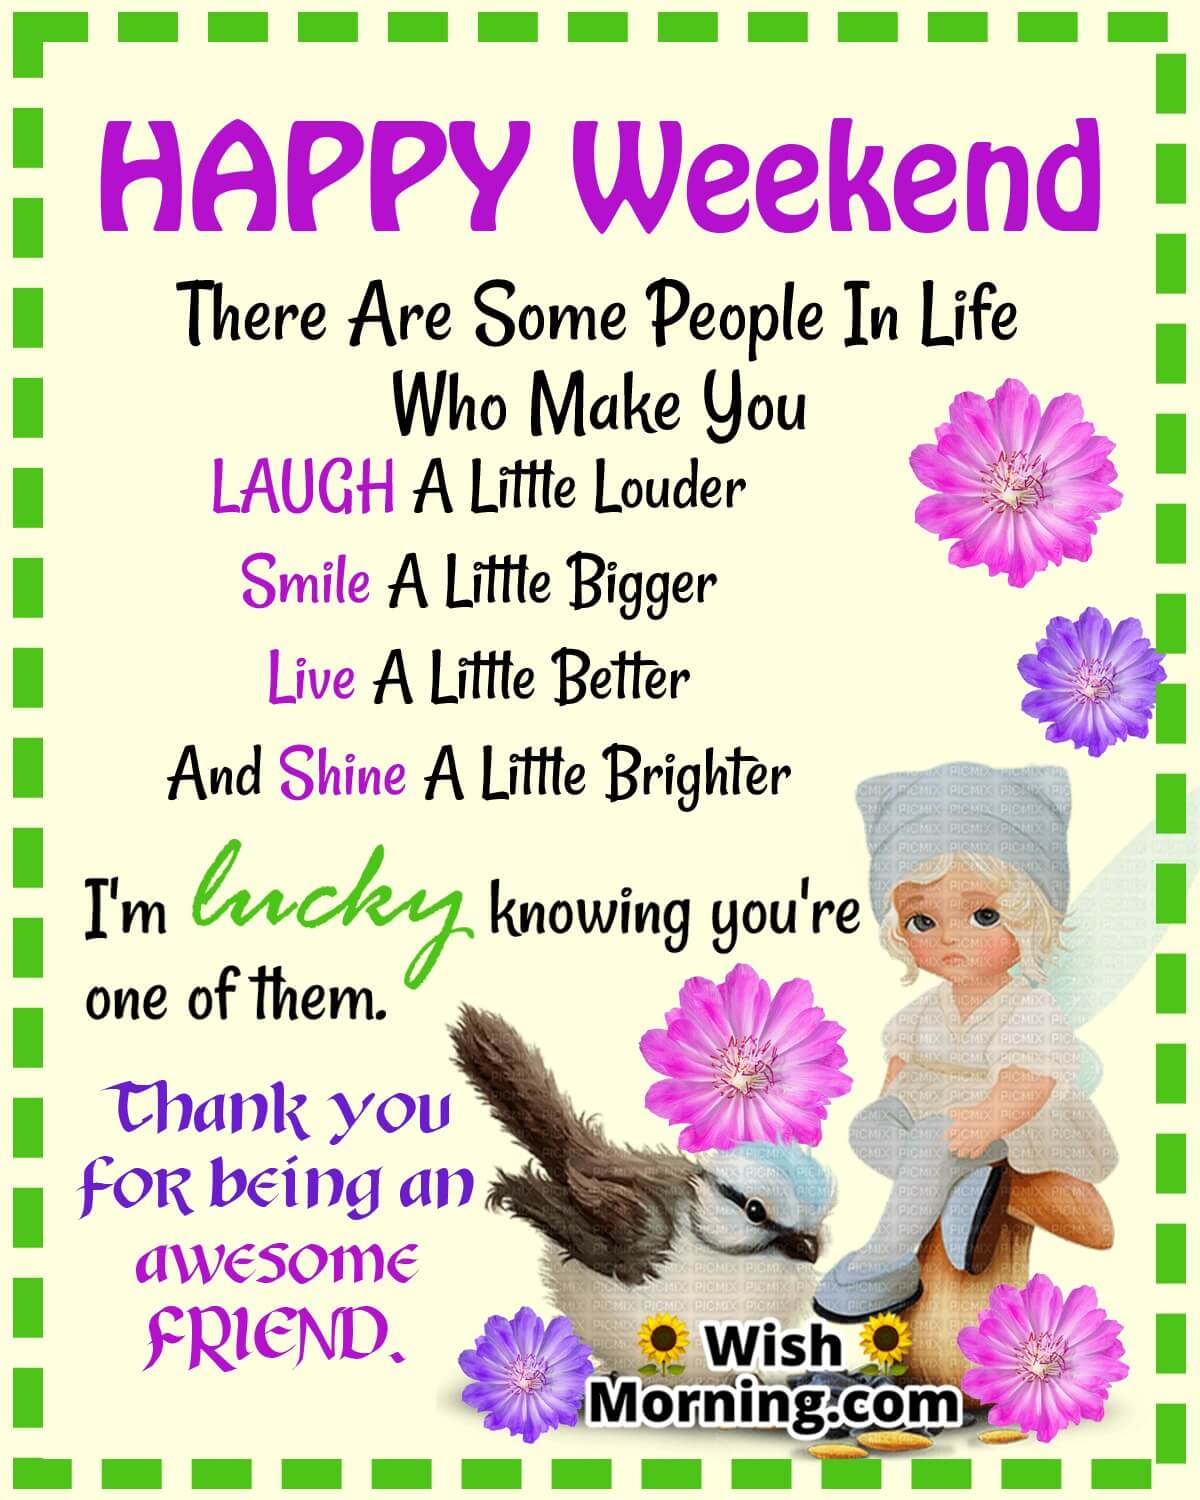 Wonderful Weekend Quotes Wishes Wish Morning